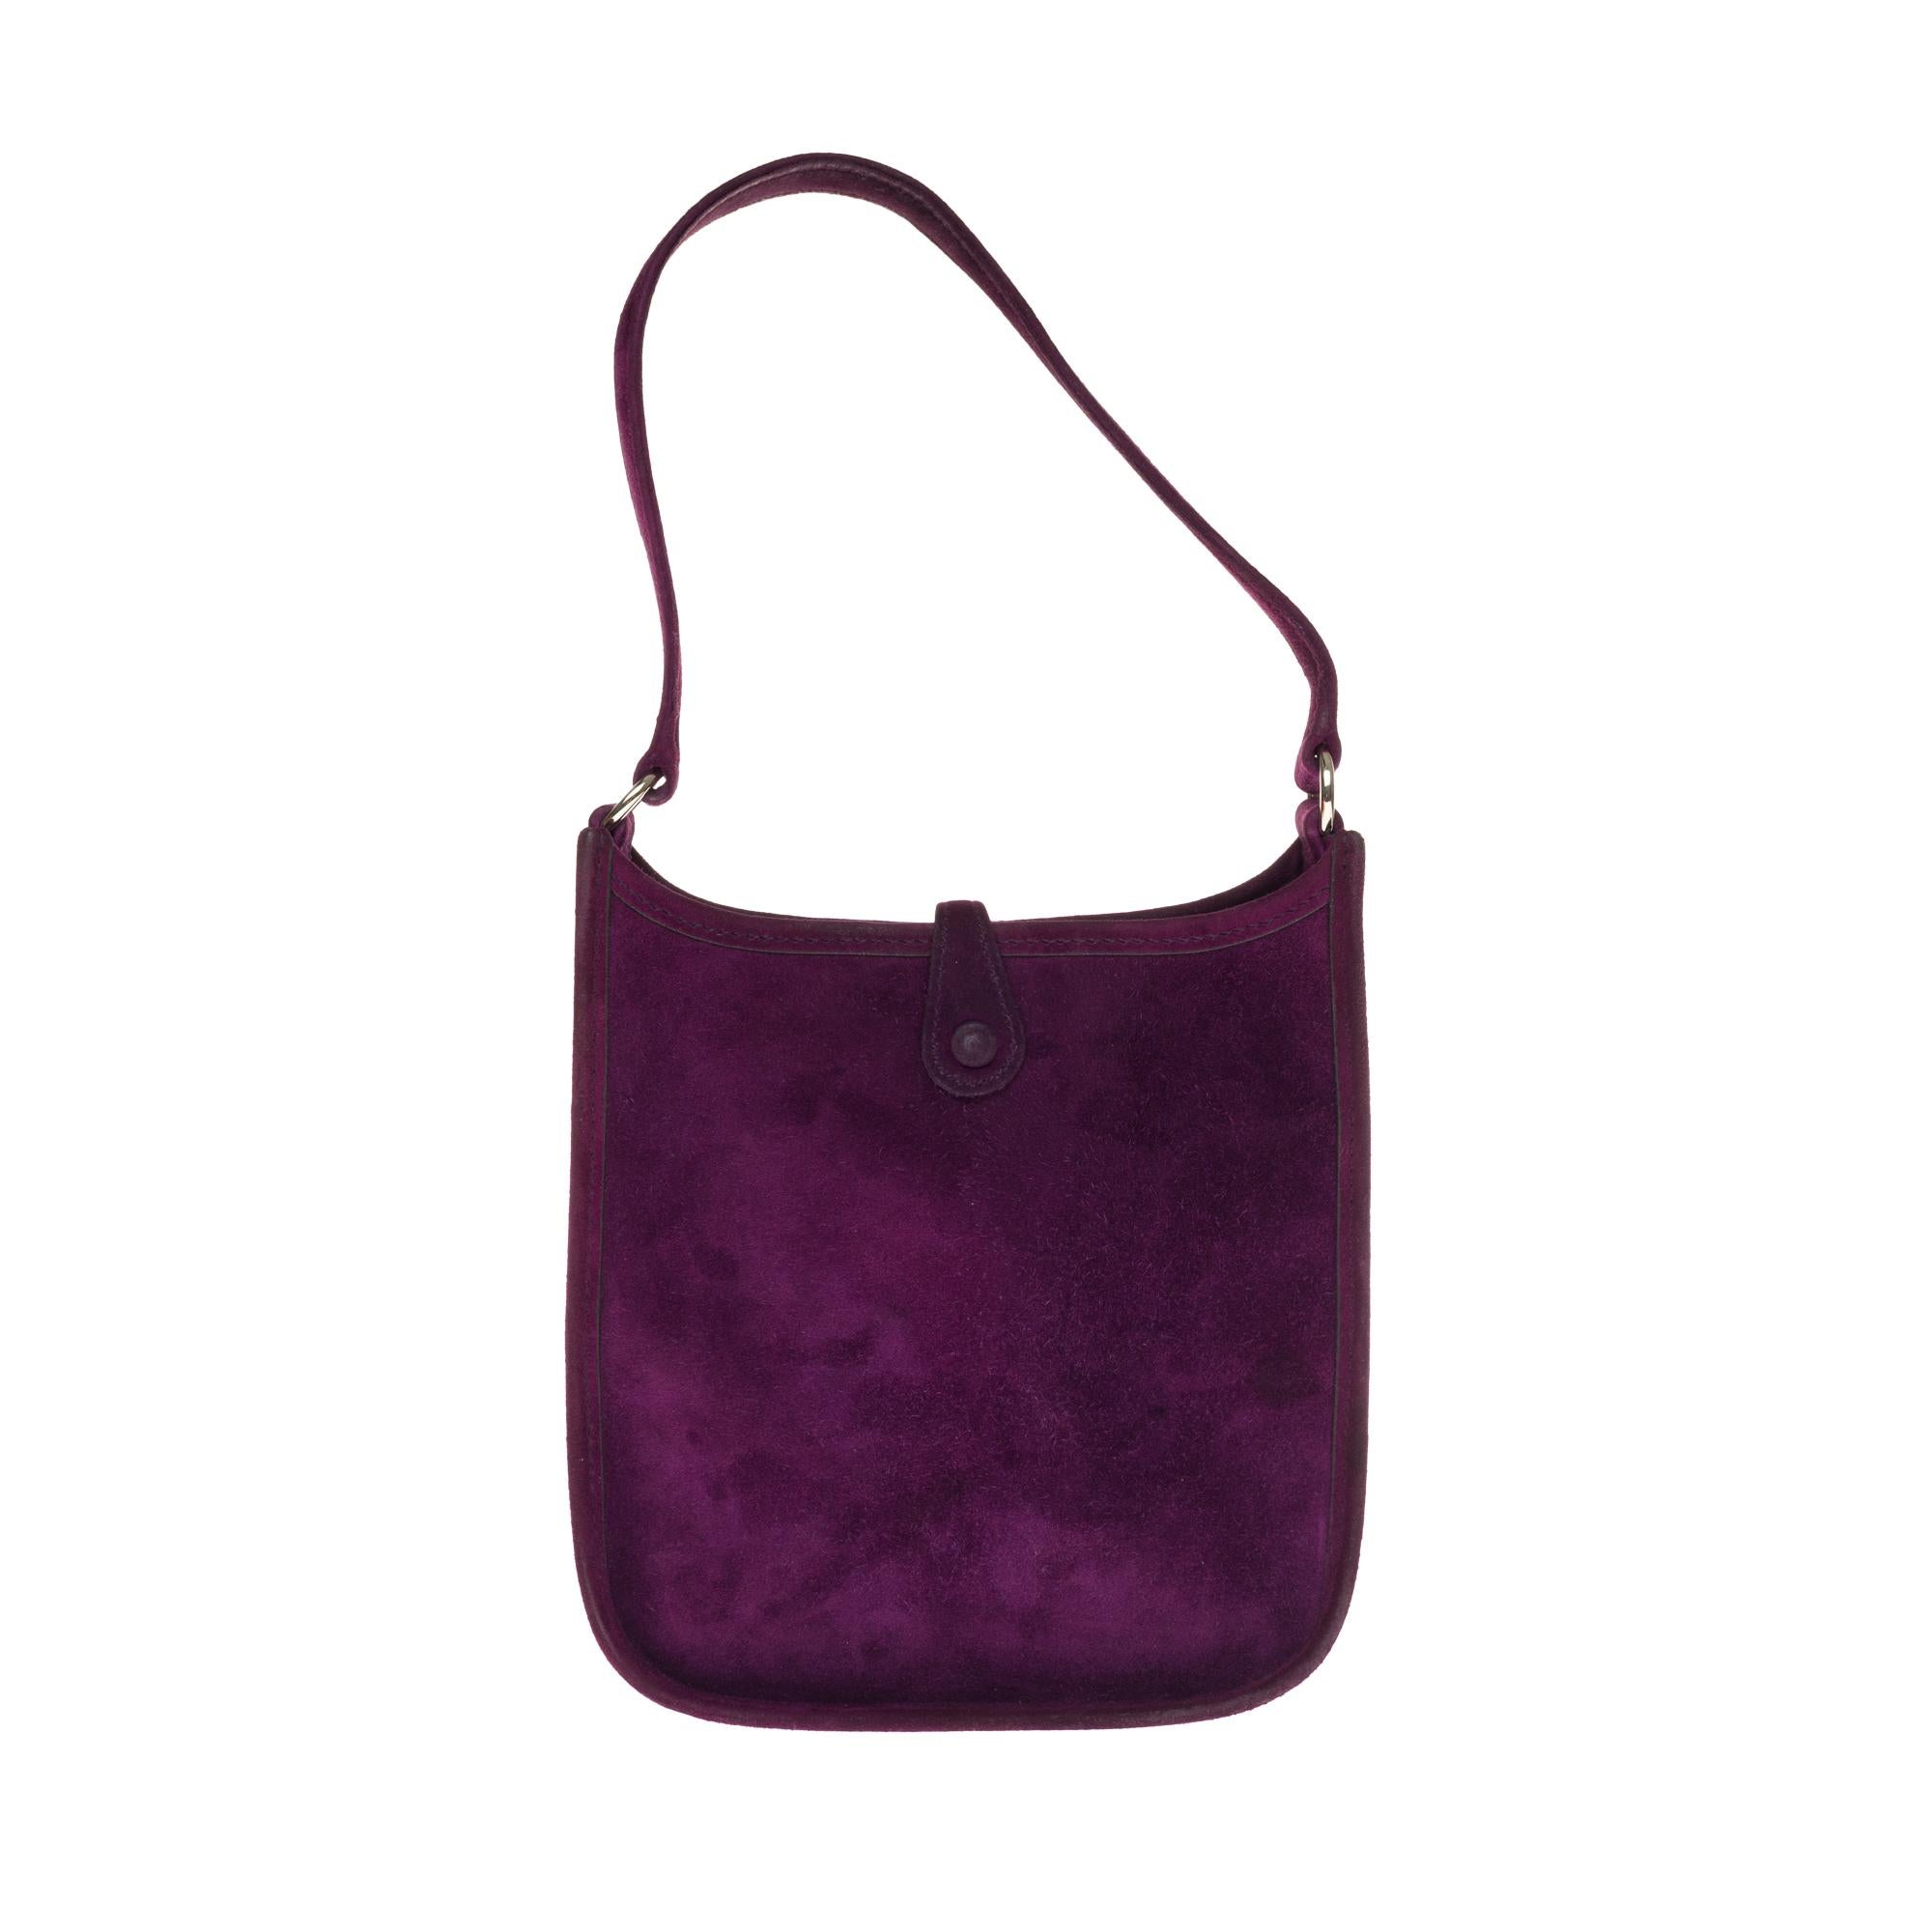 Gorgeous and rare Hermes Evelyne TPM bag in purple suede, palladium-plated metal trim, a purple suede handle allowing a handheld.

Closure by press button.
Interior in purple lambskin.
Signature: 